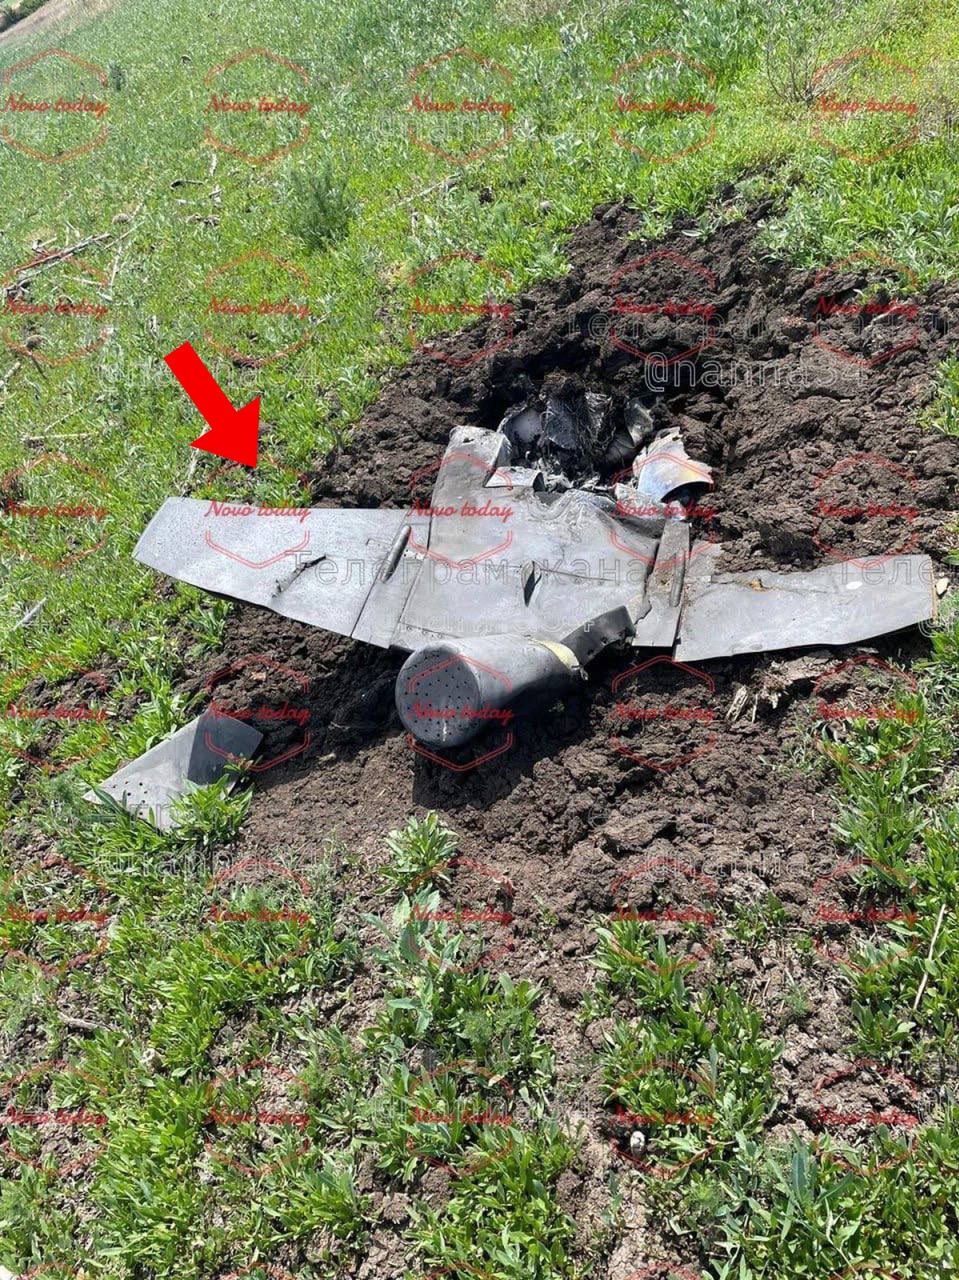 A crashed Ch-101 missile in Russia